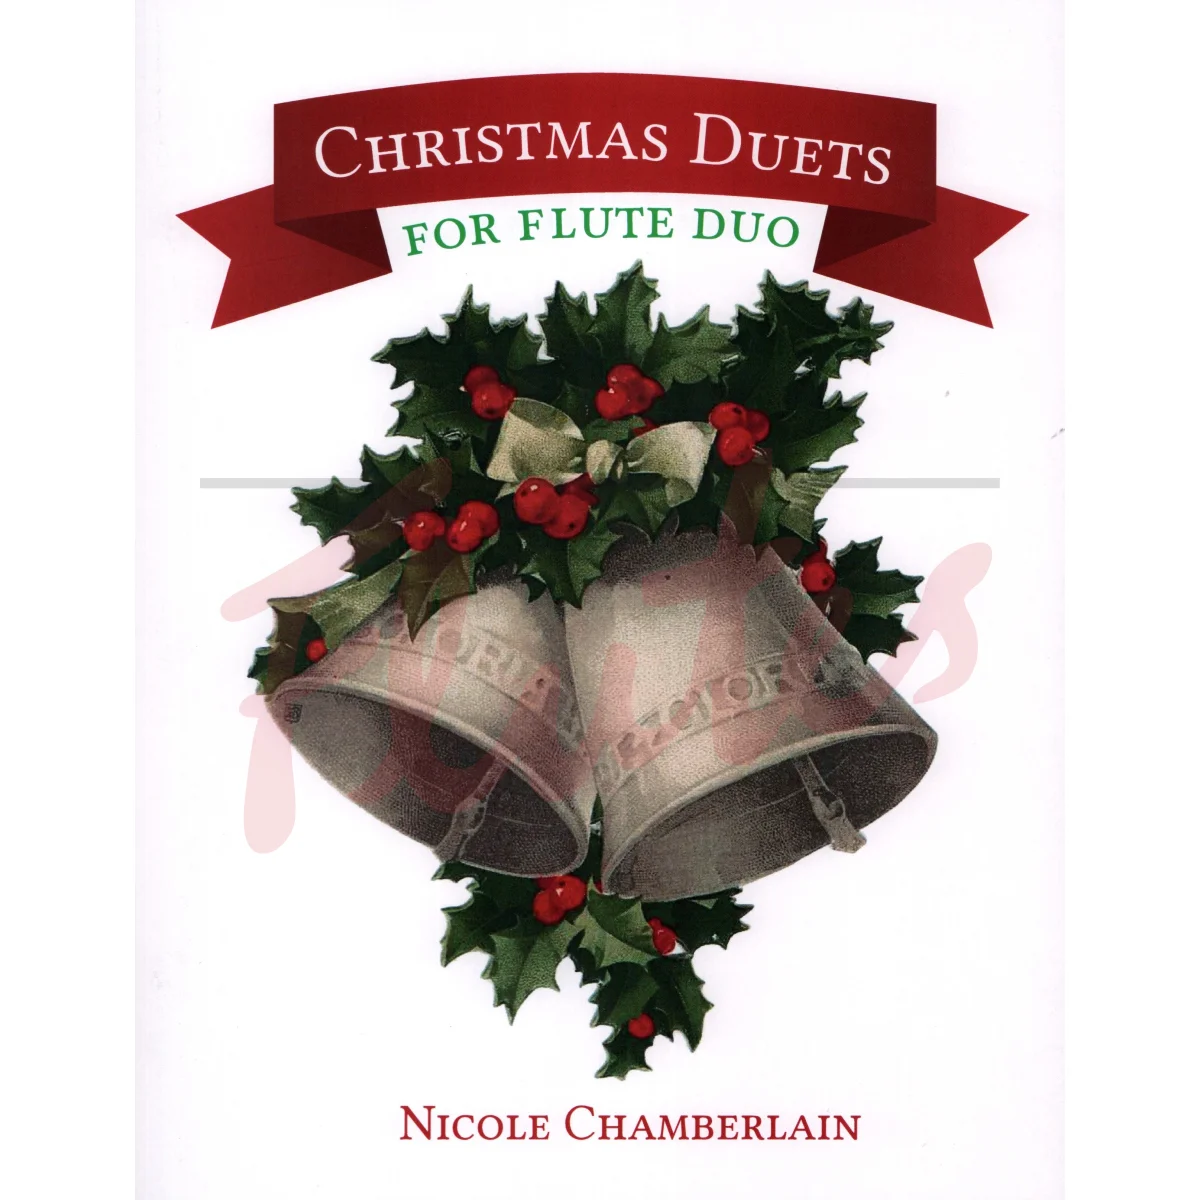 Christmas Duets for Flute Duo